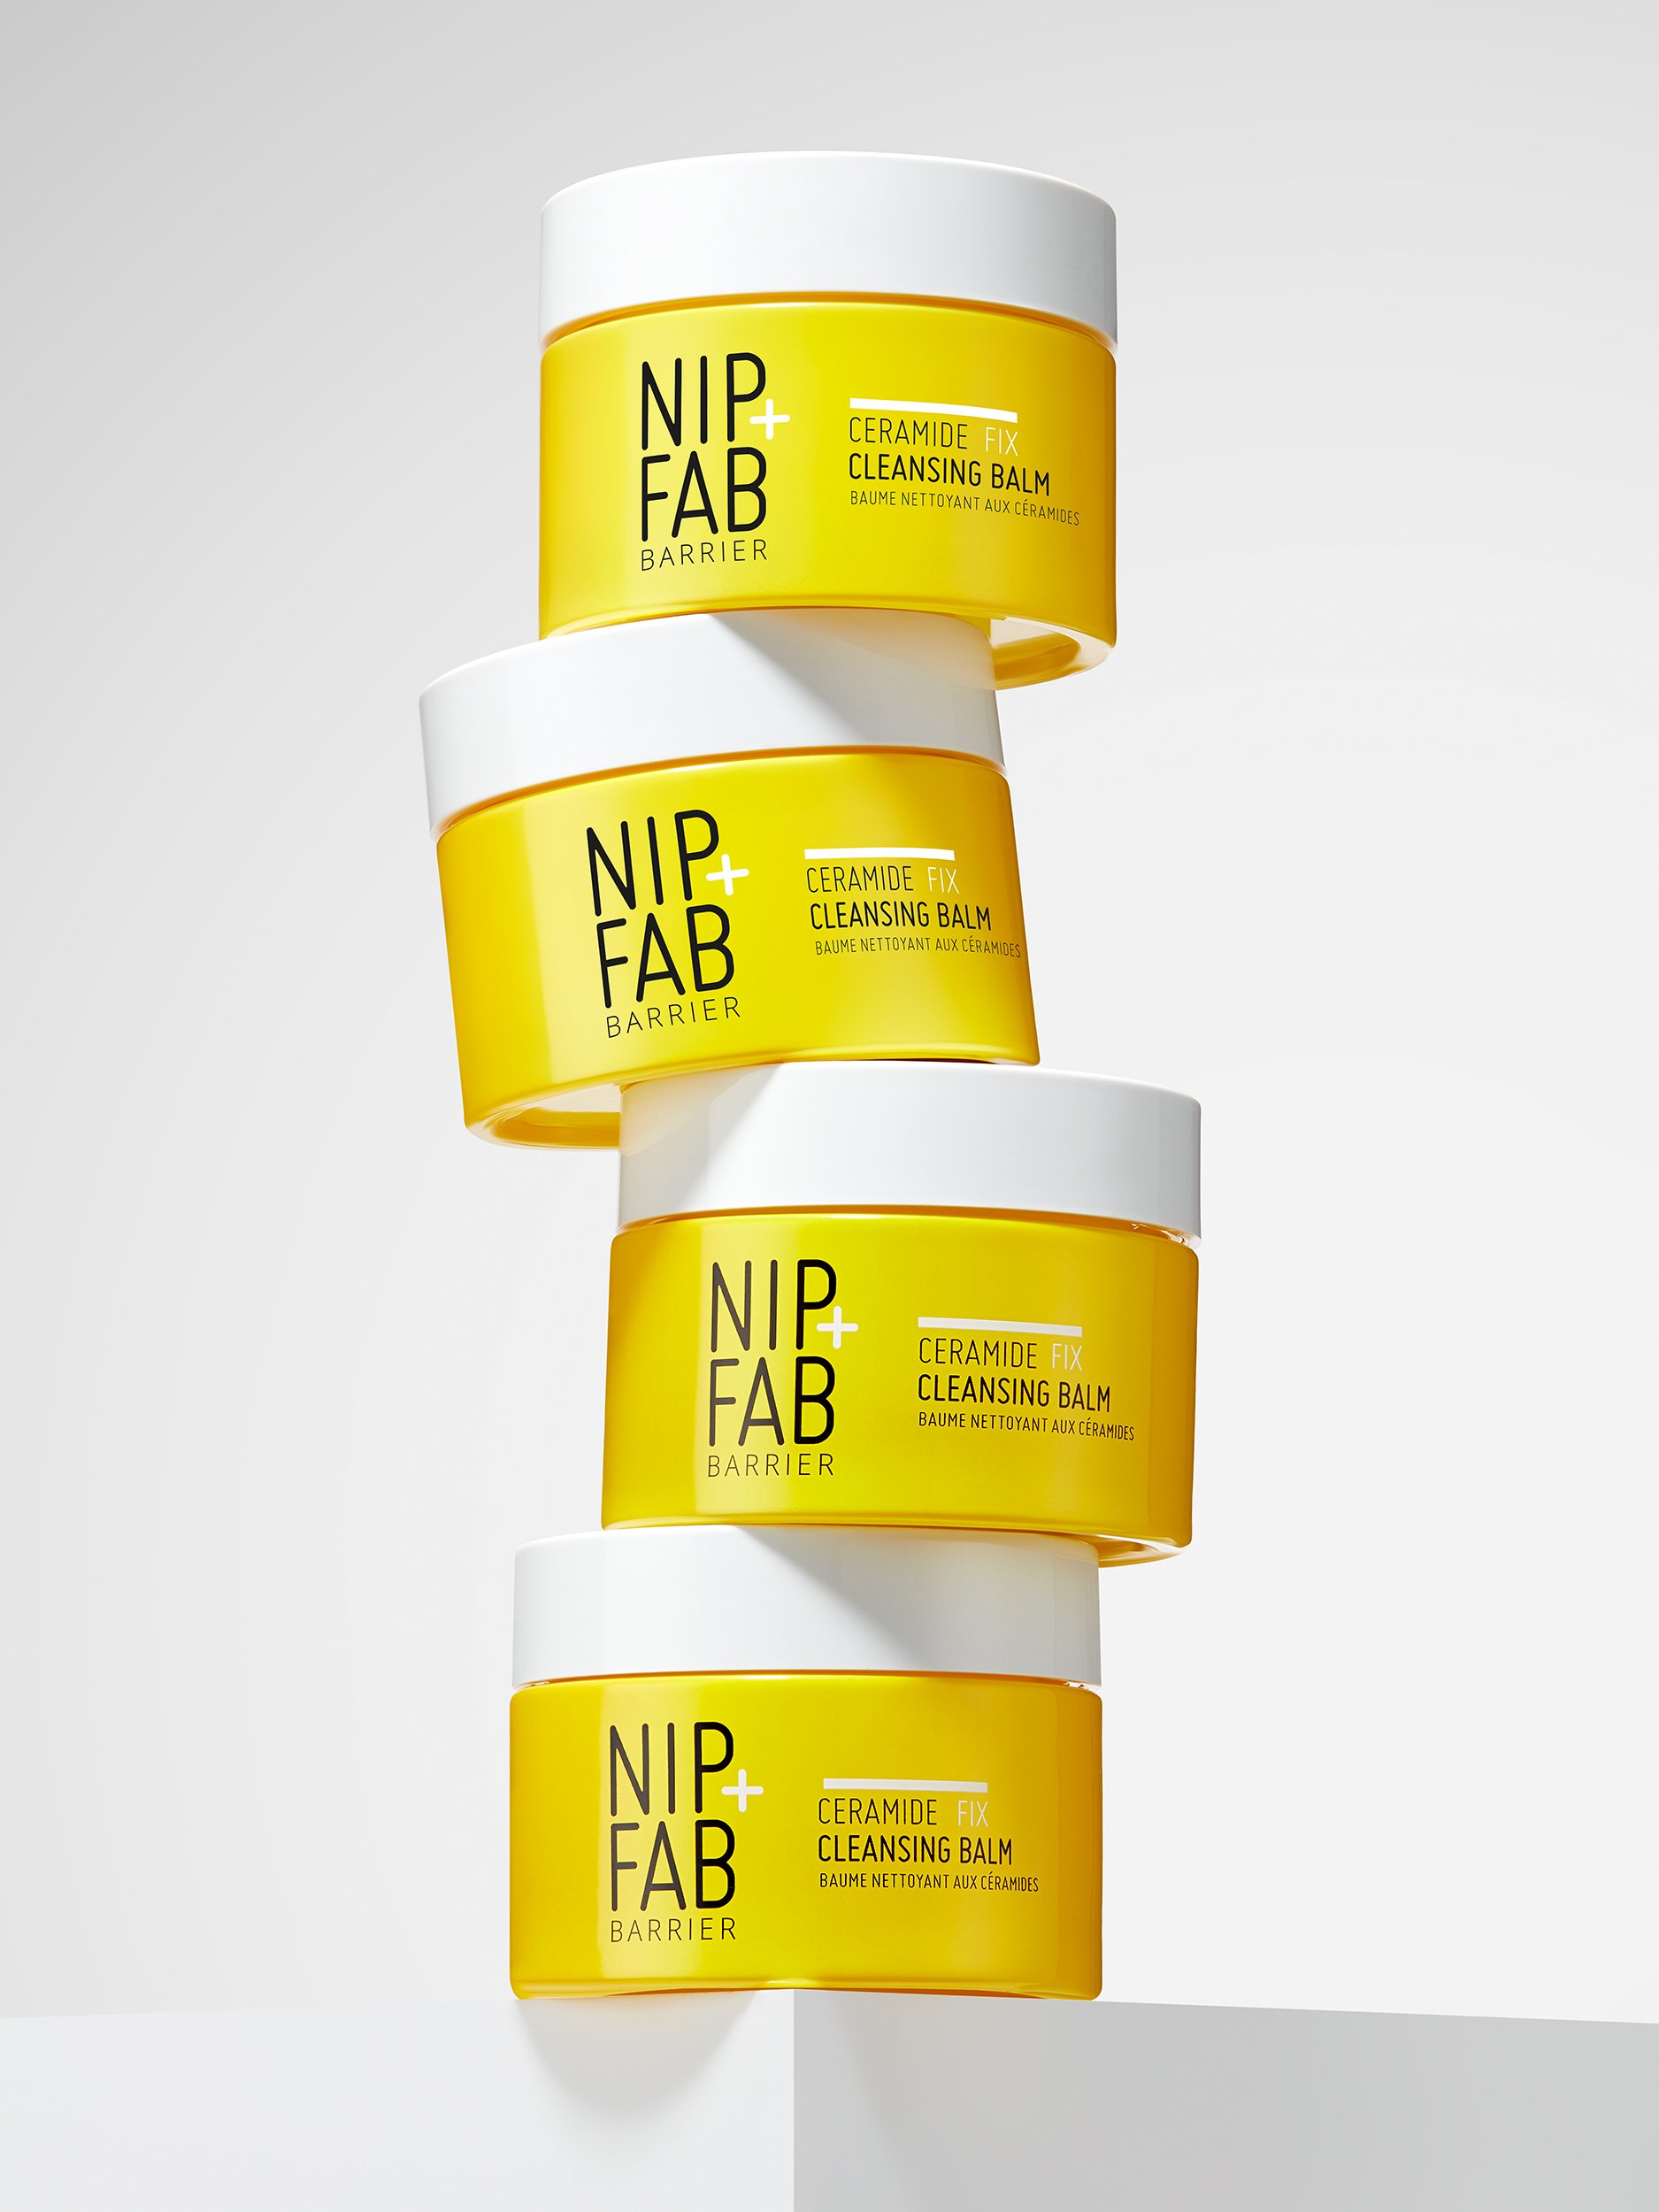 Nip + Fab Ceramide Fix Cleansing Balm -  photography by Simon Lyle Ritchie